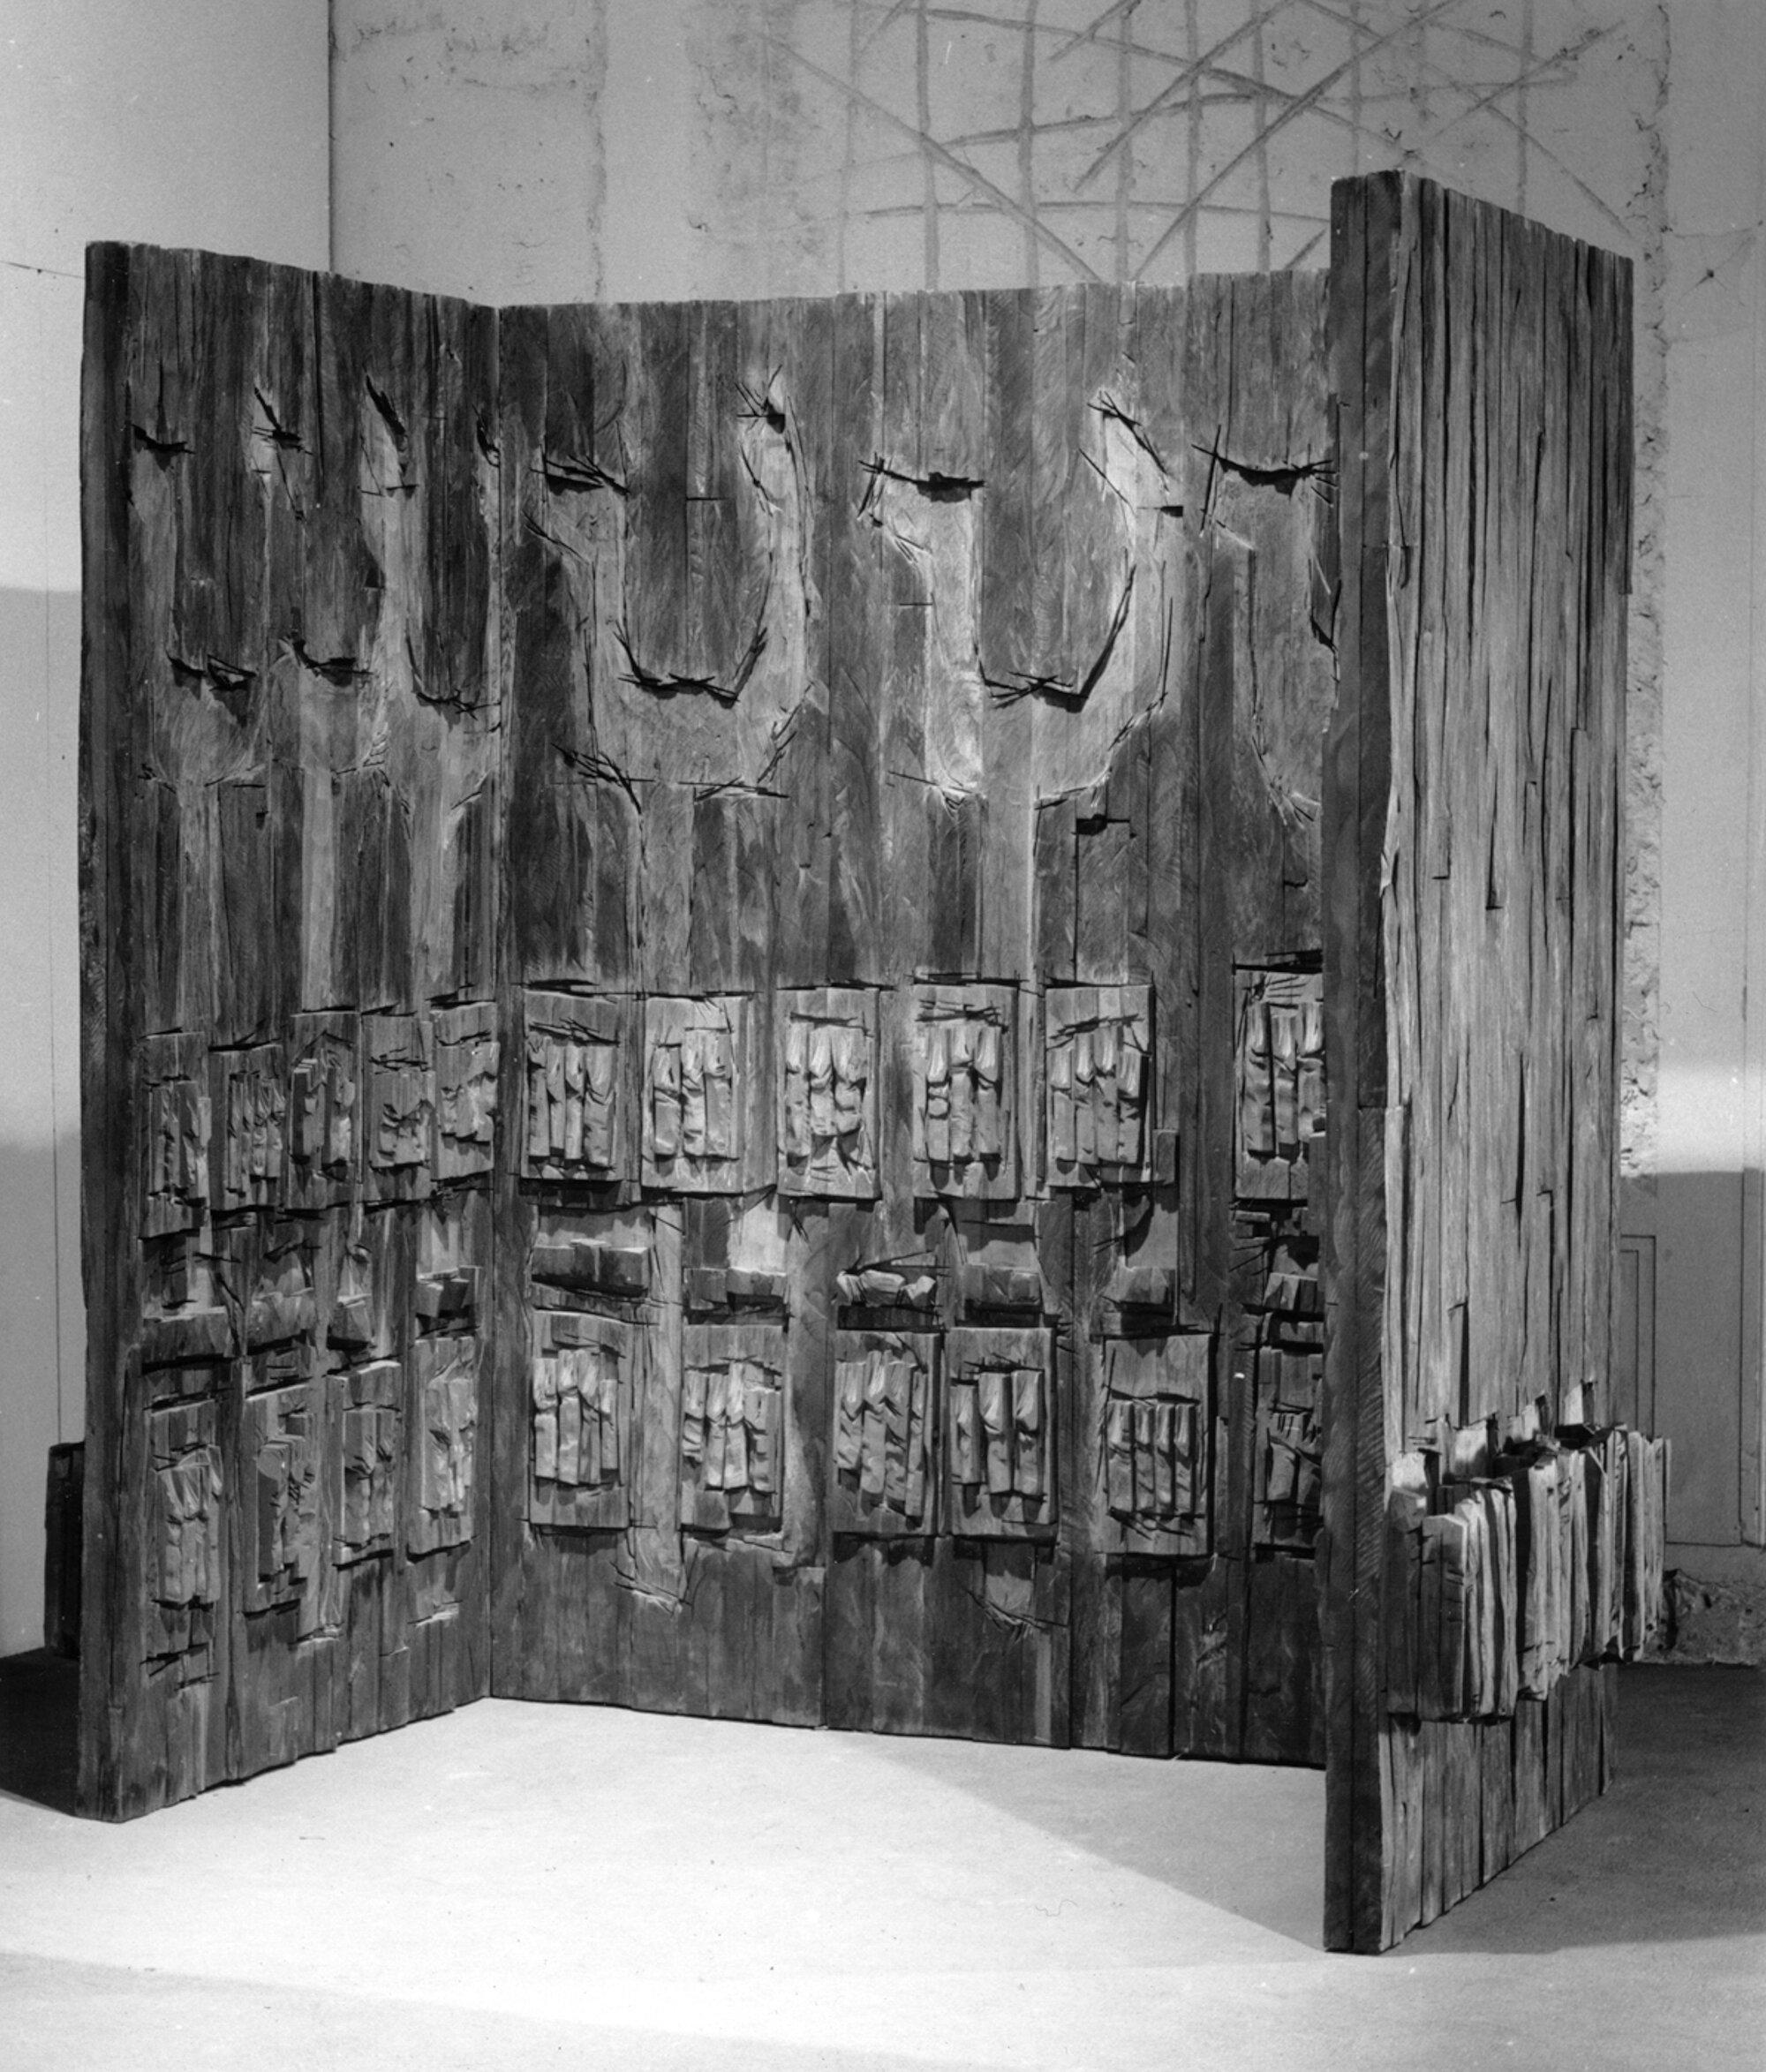       House of Spoons , 1989 Cedar, stain, and graphite 96 x 72 x 48 in.    Center for Contemporary Art Ujazdowski Castle  